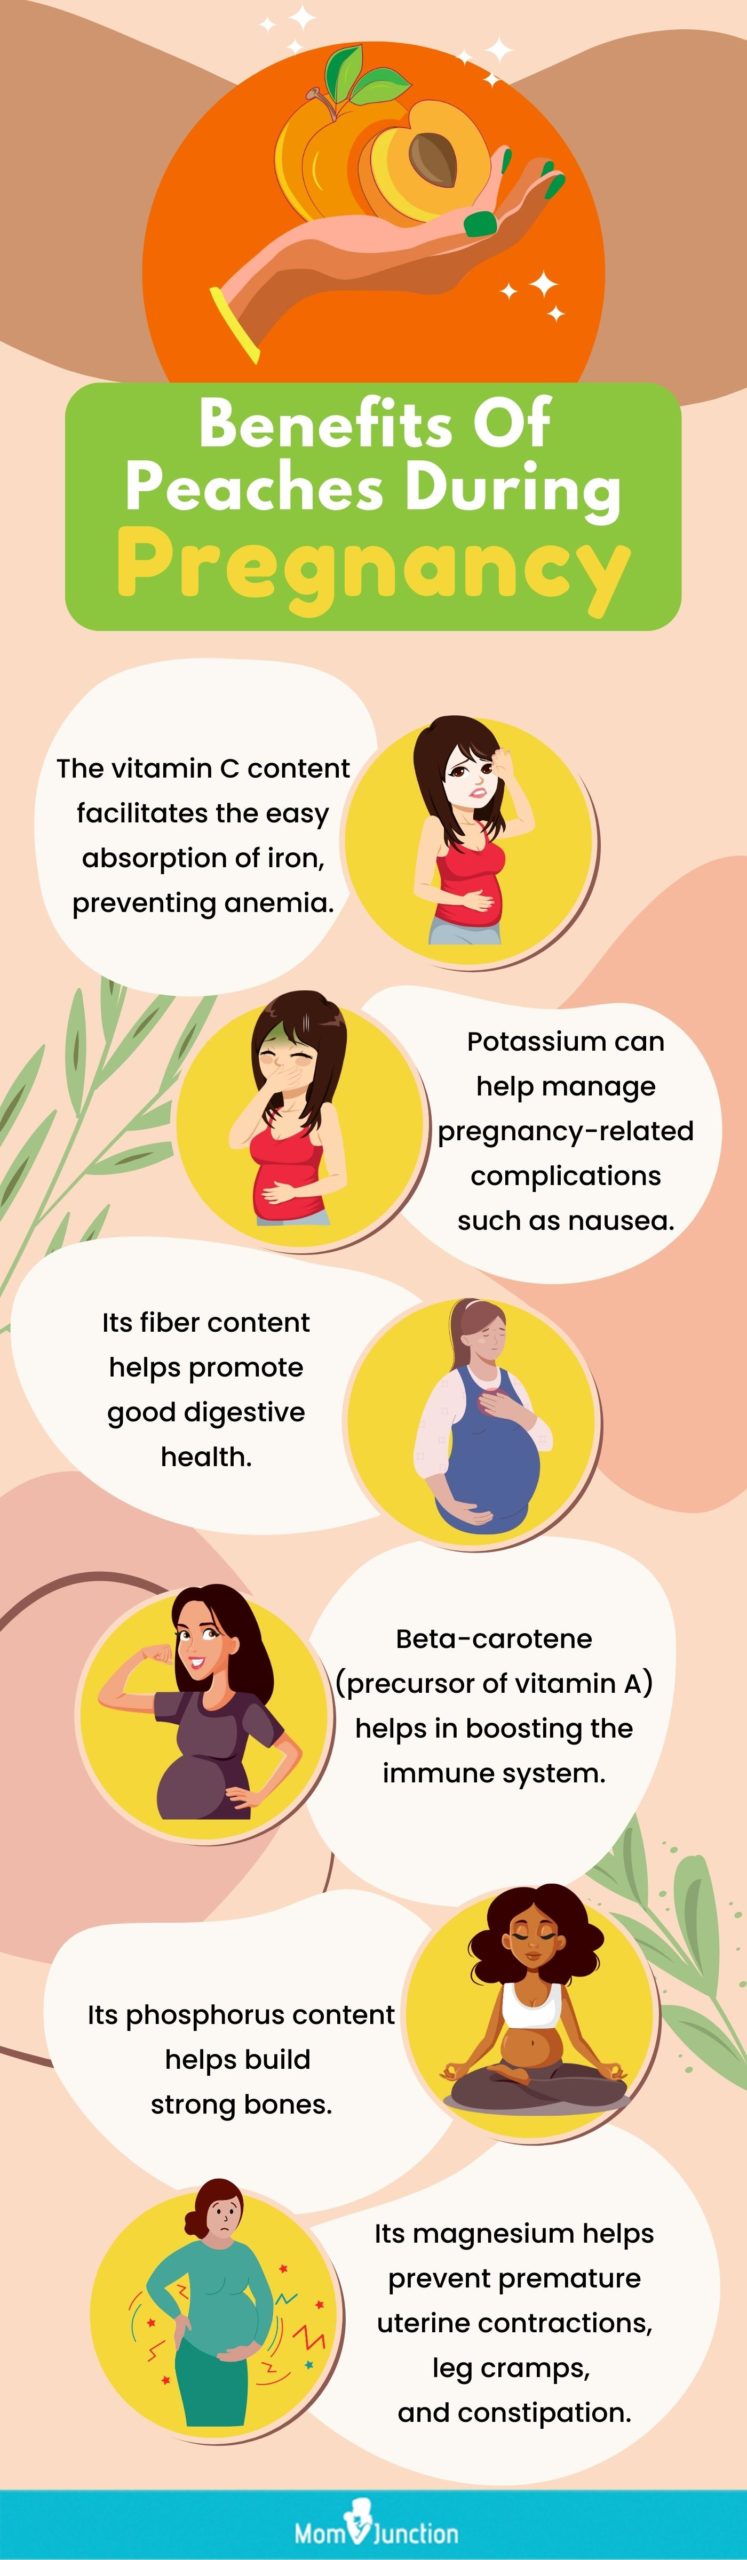 benefits of peaches during pregnancy (infographic)